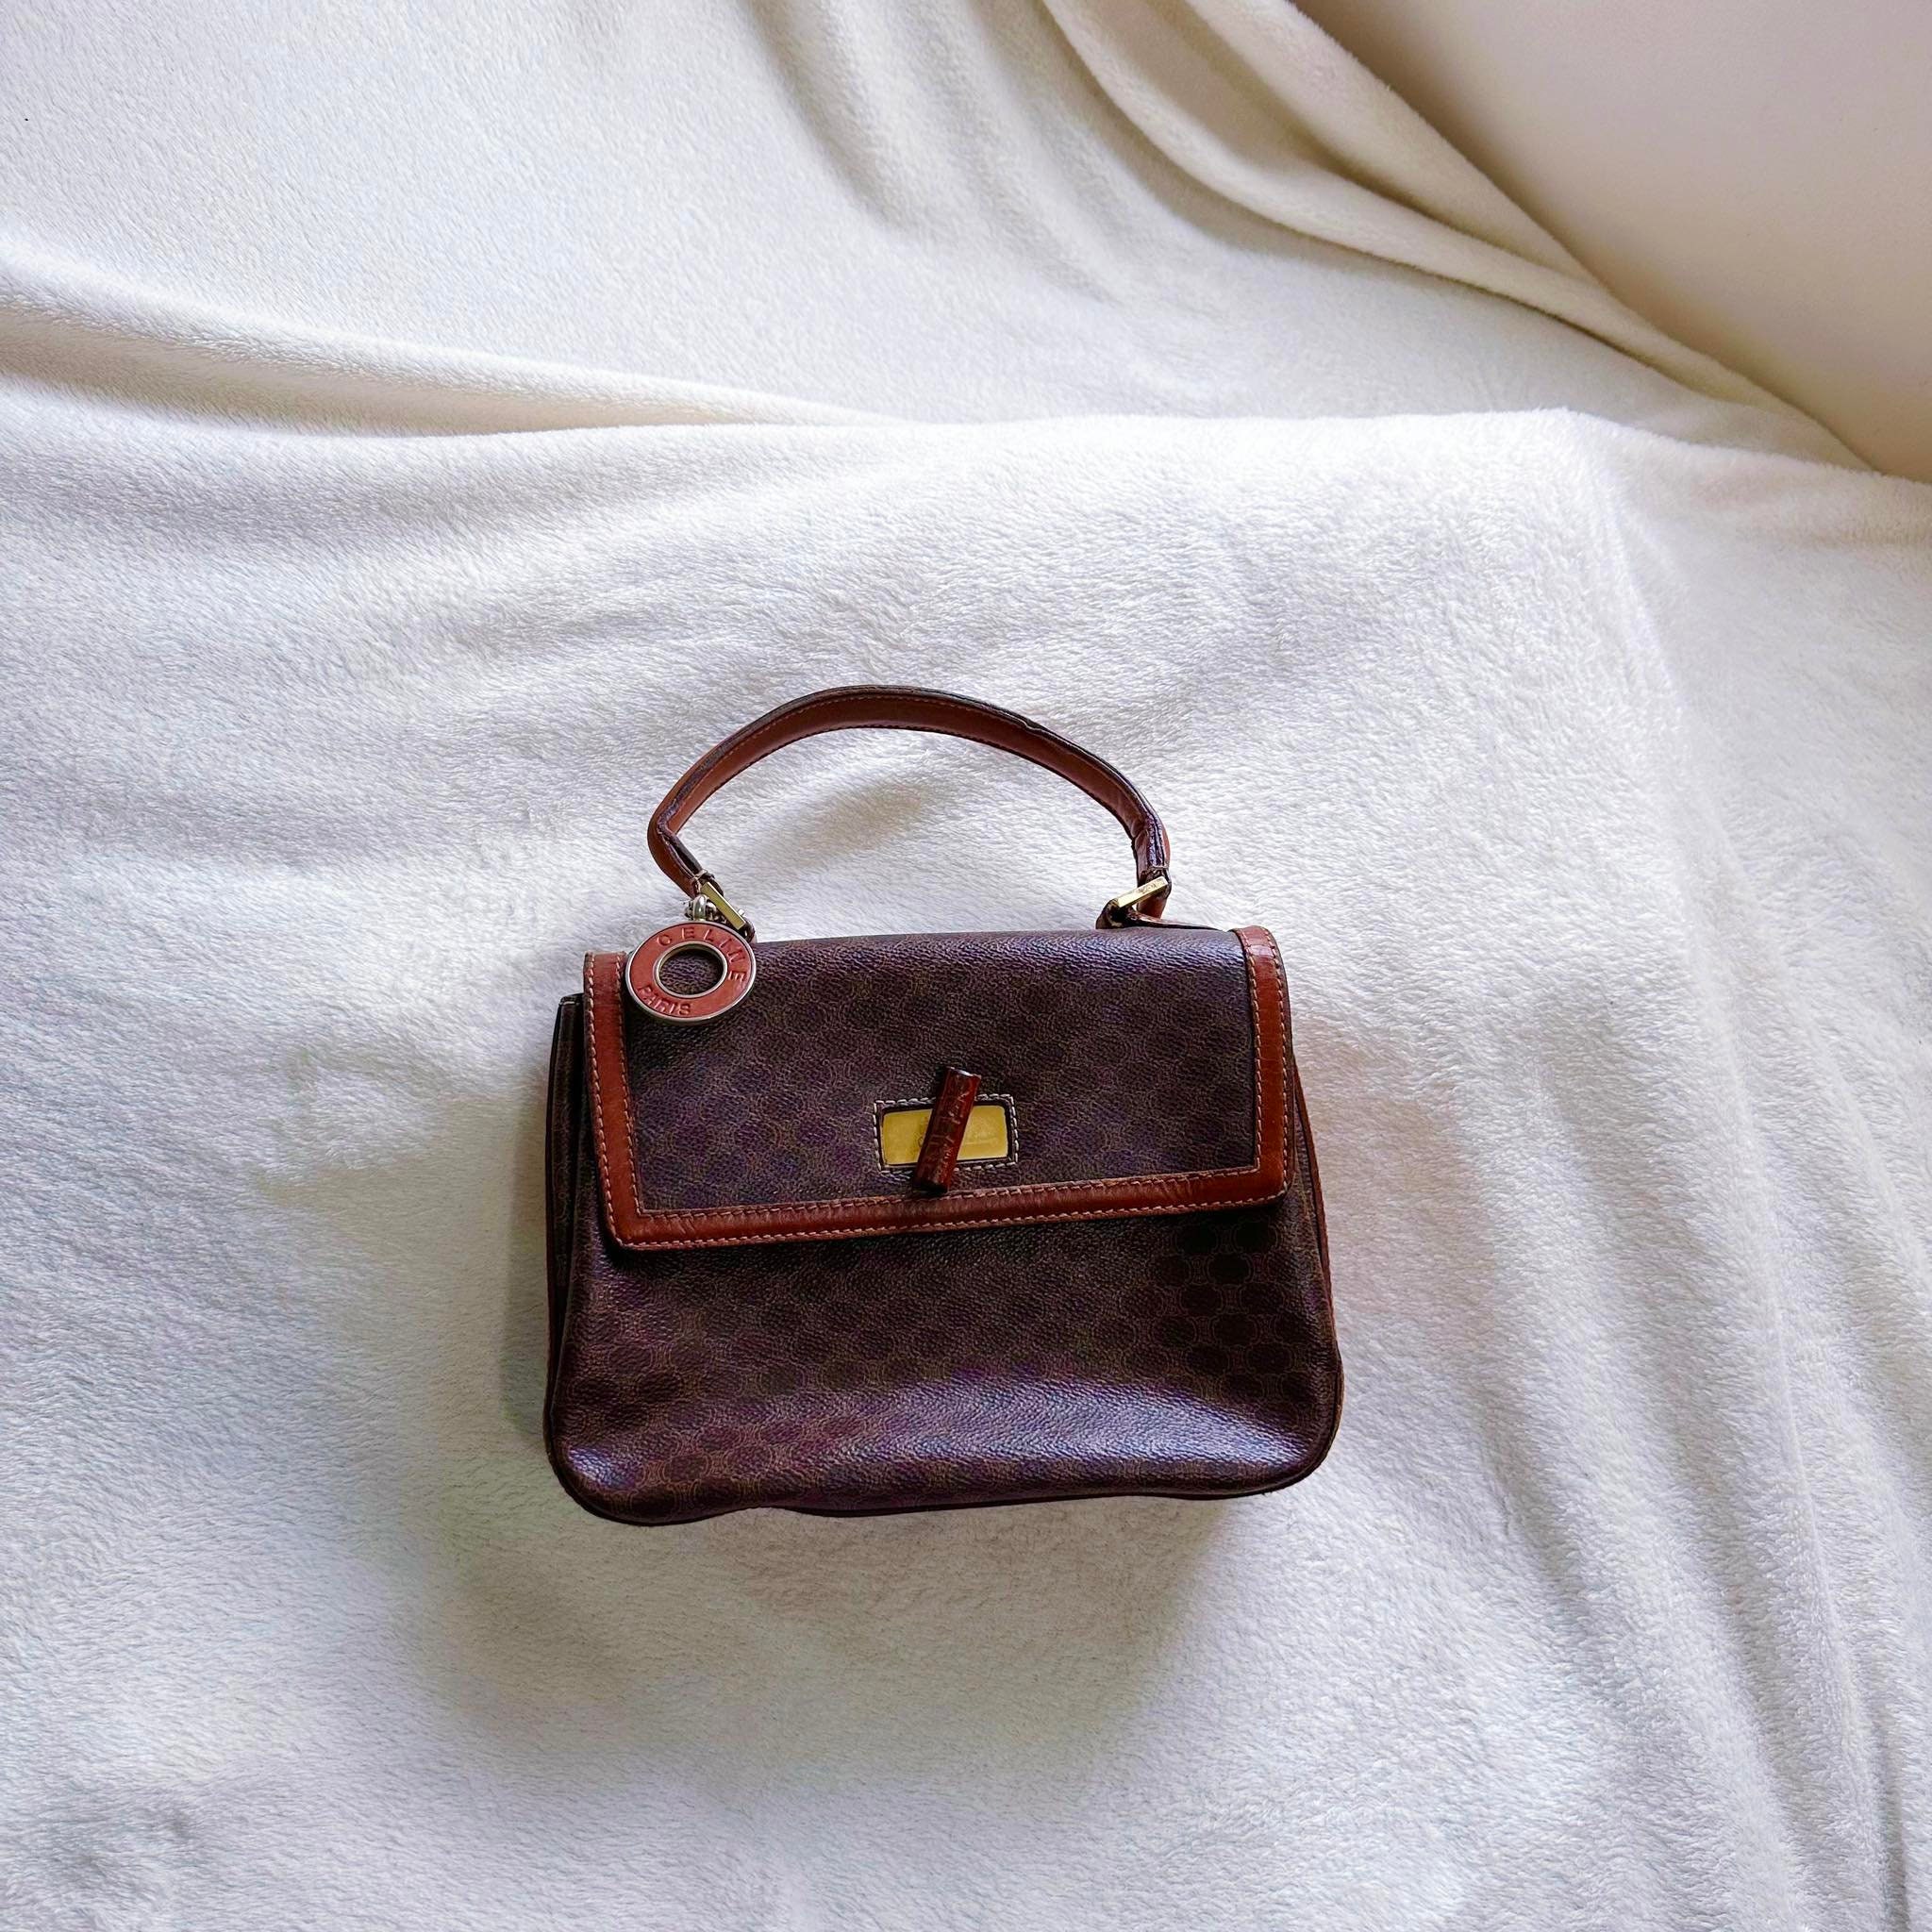 Vintage Celine brown macadam blaison doctor bag with tanned brown